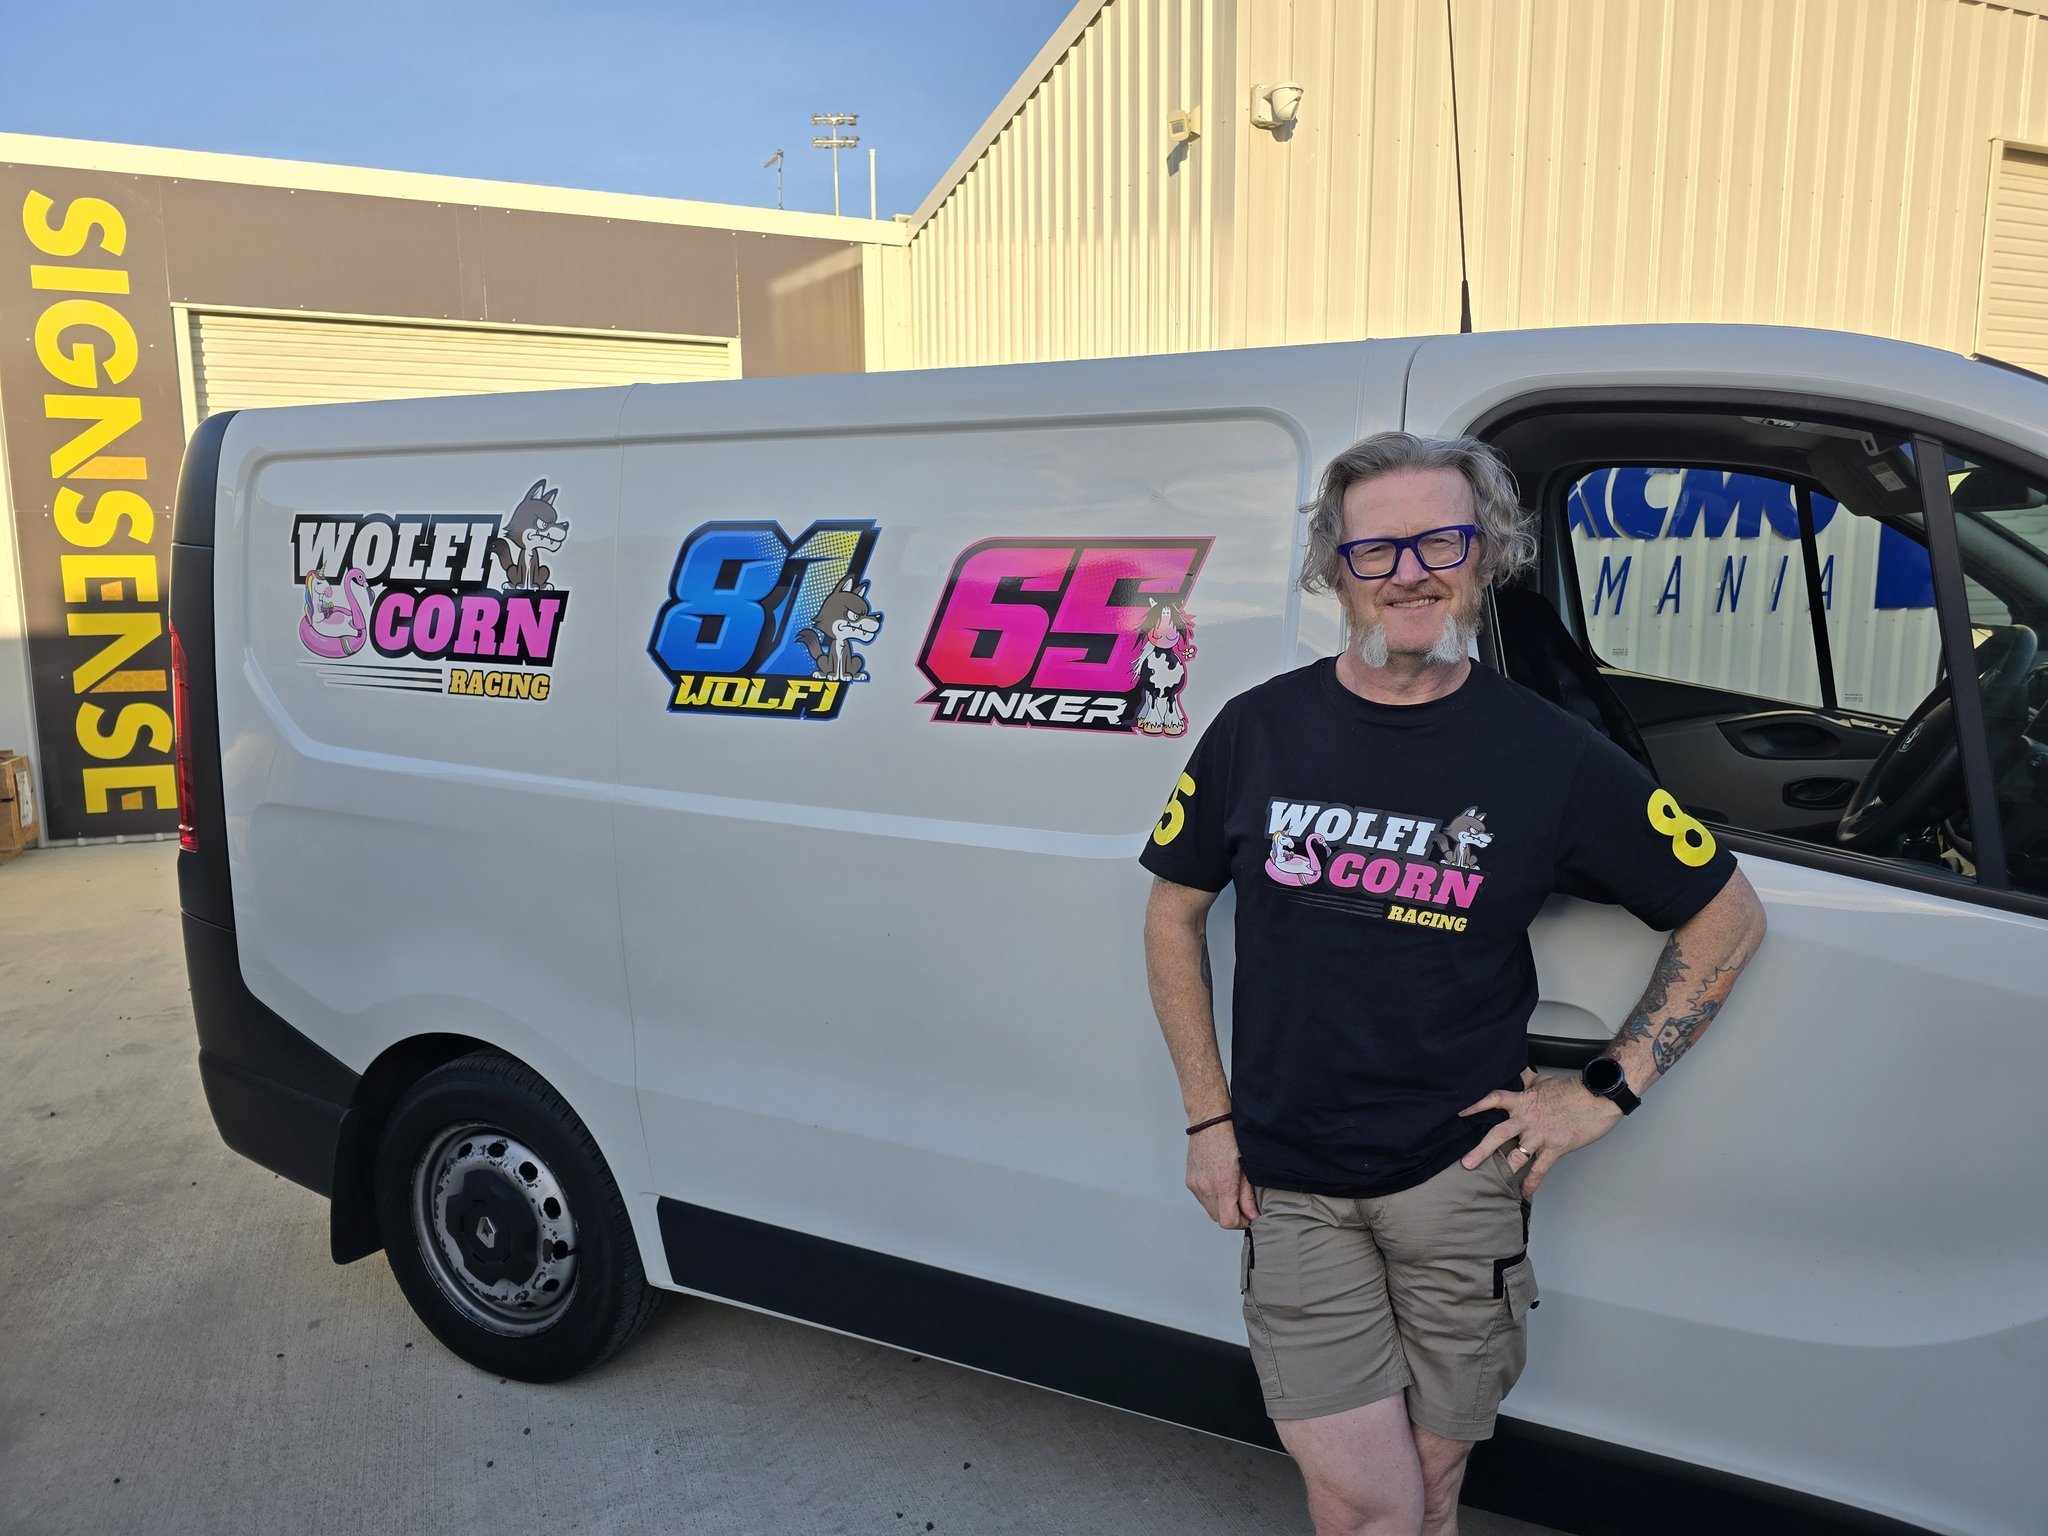 🚀 Check out our latest work at Signsense! 🚀

We recently had the pleasure of creating these awesome printed vinyl racing graphics for our friends at WolfiCorn Racing. Their vans look ready to hit the track with these vibrant and dynamic designs! 🏎